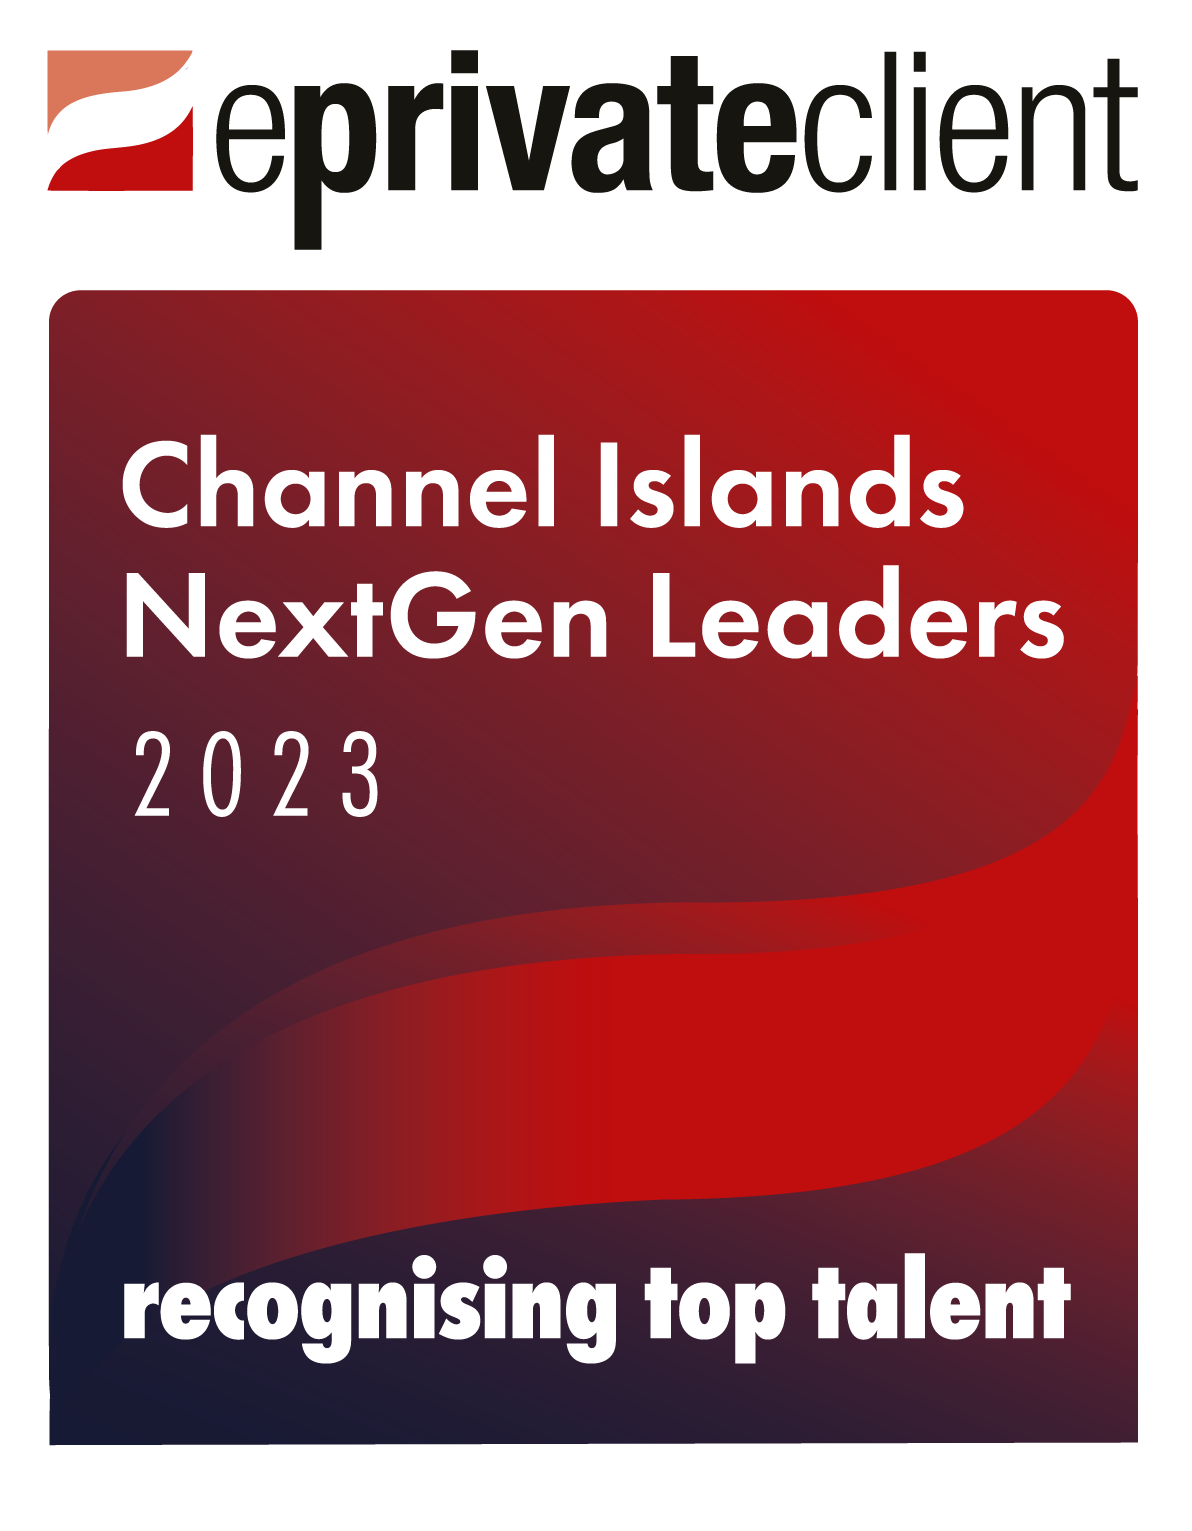 Nominations for the new 2023 eprivateclient Channel Islands NextGen Leaders now open